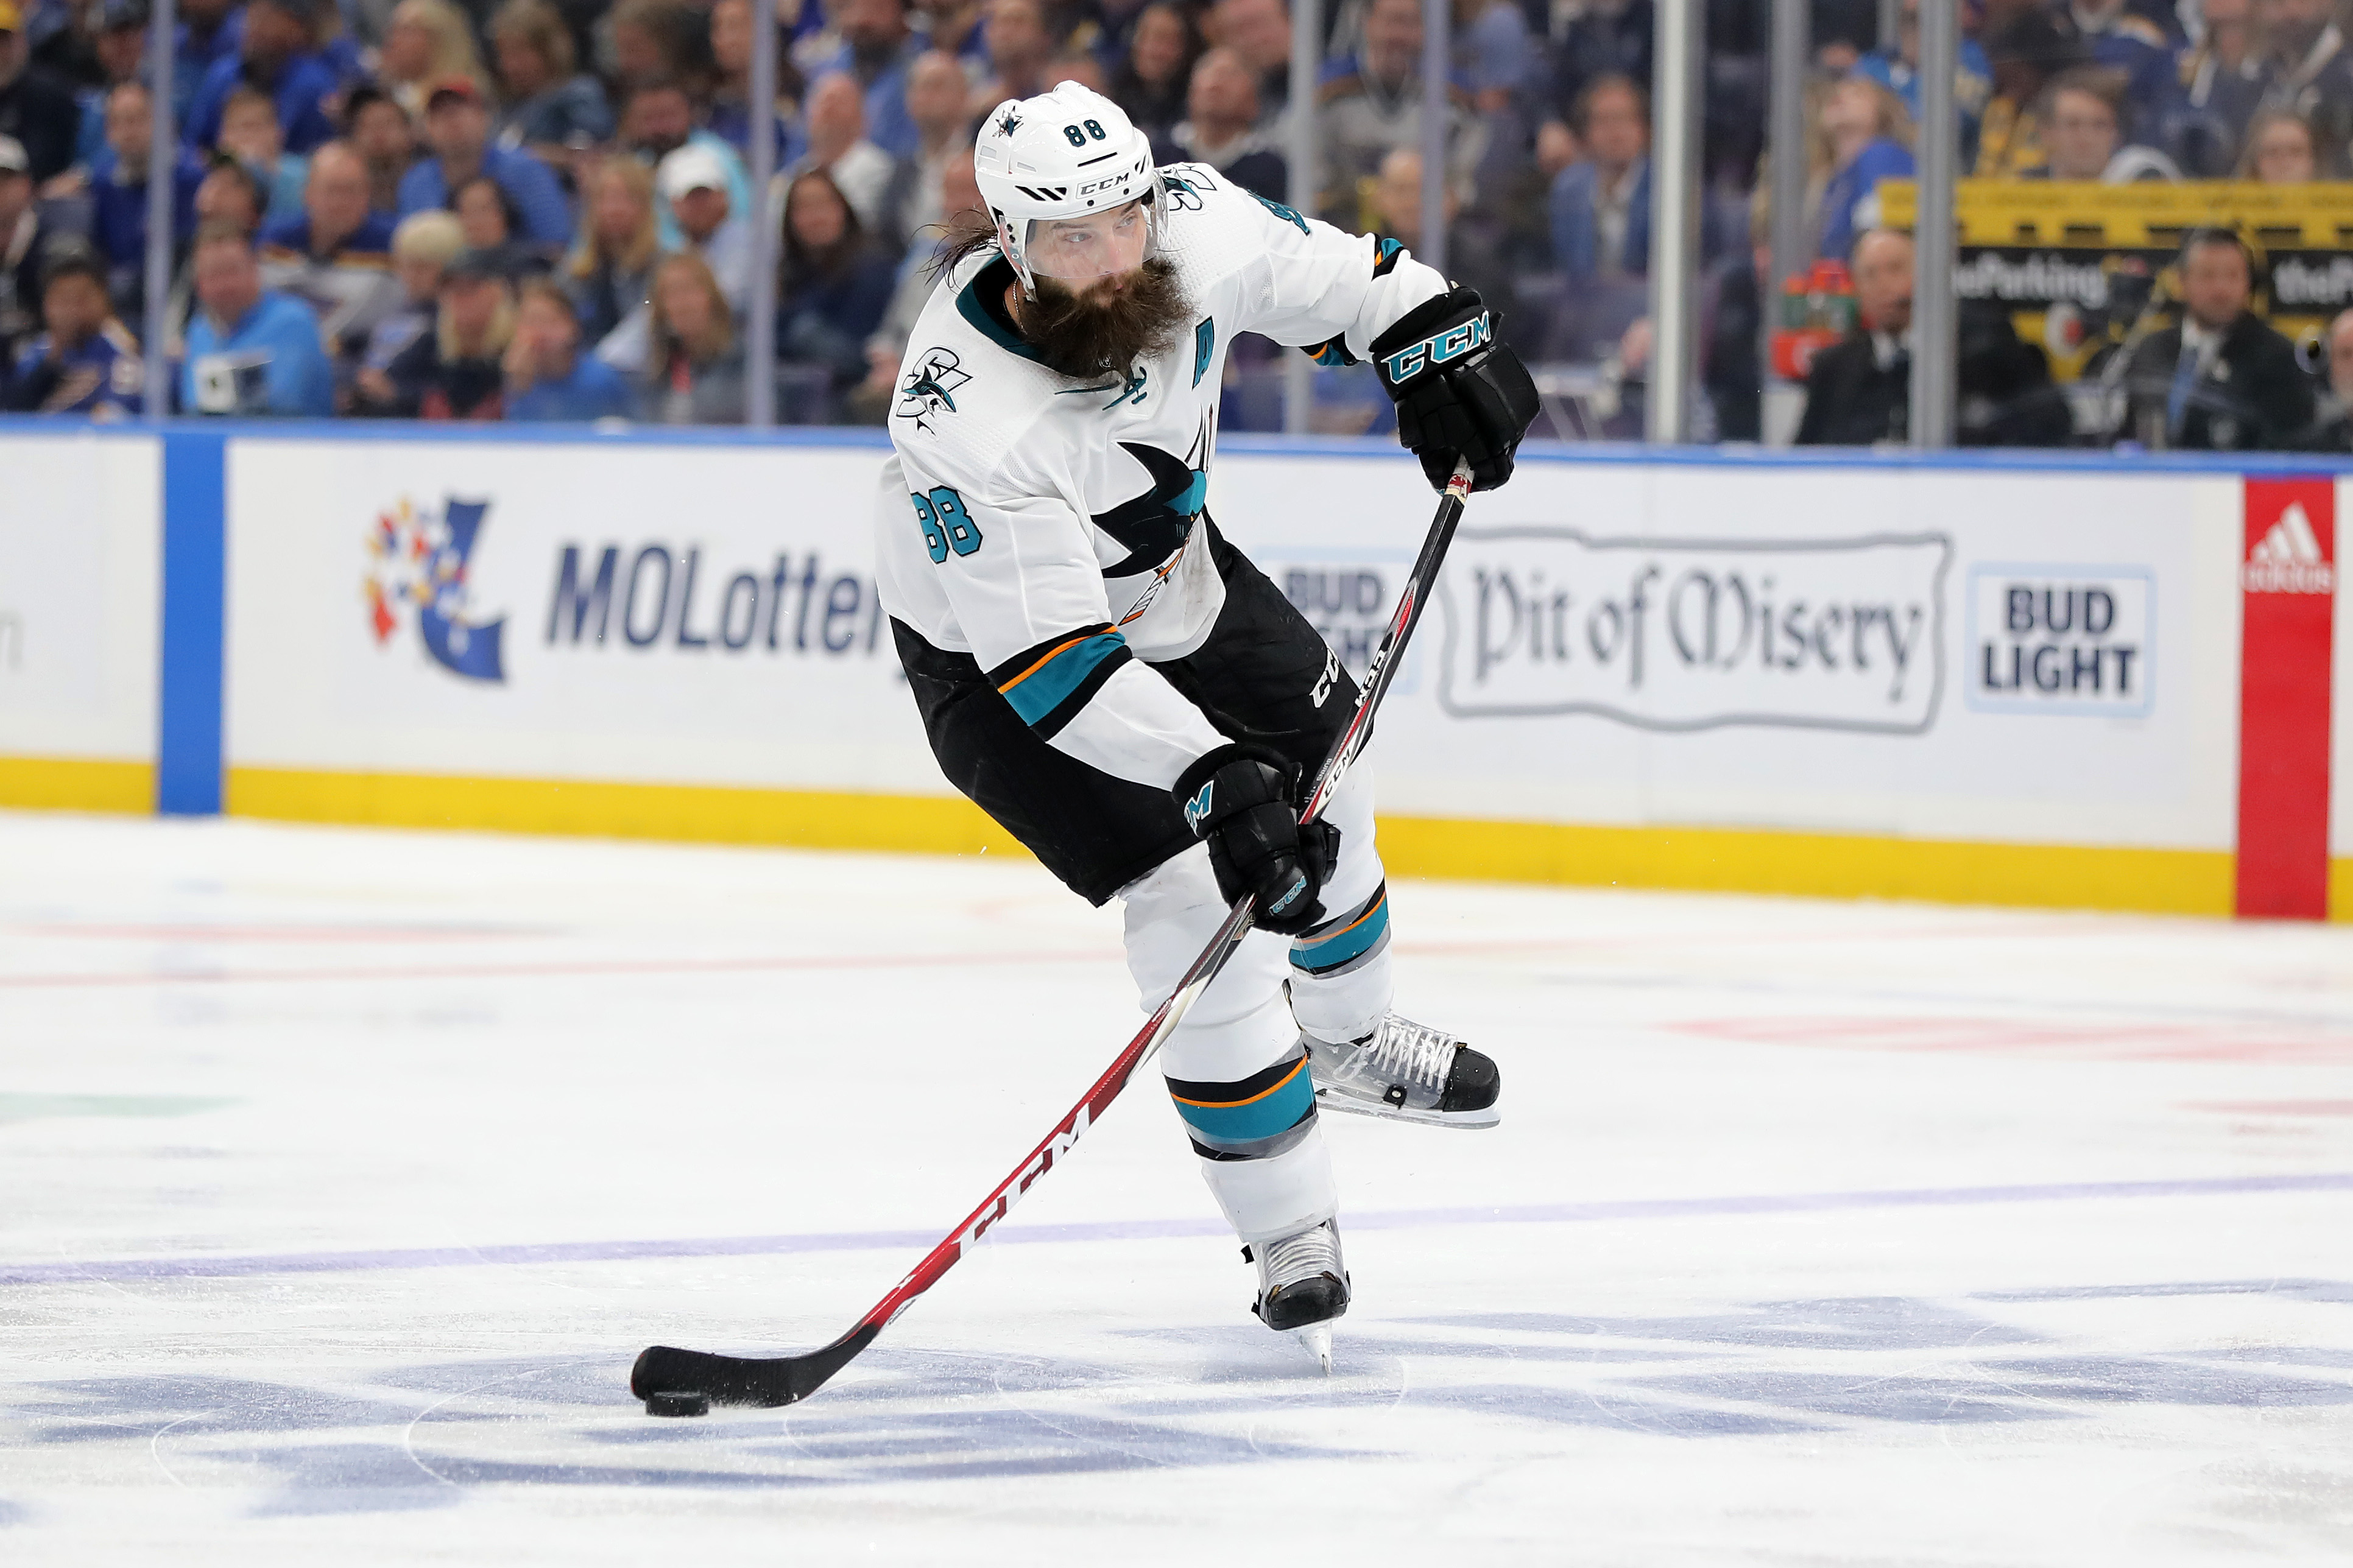 Brent Burns of the San Jose Sharks shoots the puck against the St. Louis Blues during the third period in Game 6 of the Western Conference Finals during the 2019 NHL Stanley Cup Playoffs at Enterprise Center on May 21, 2019 in St Louis, Missouri.